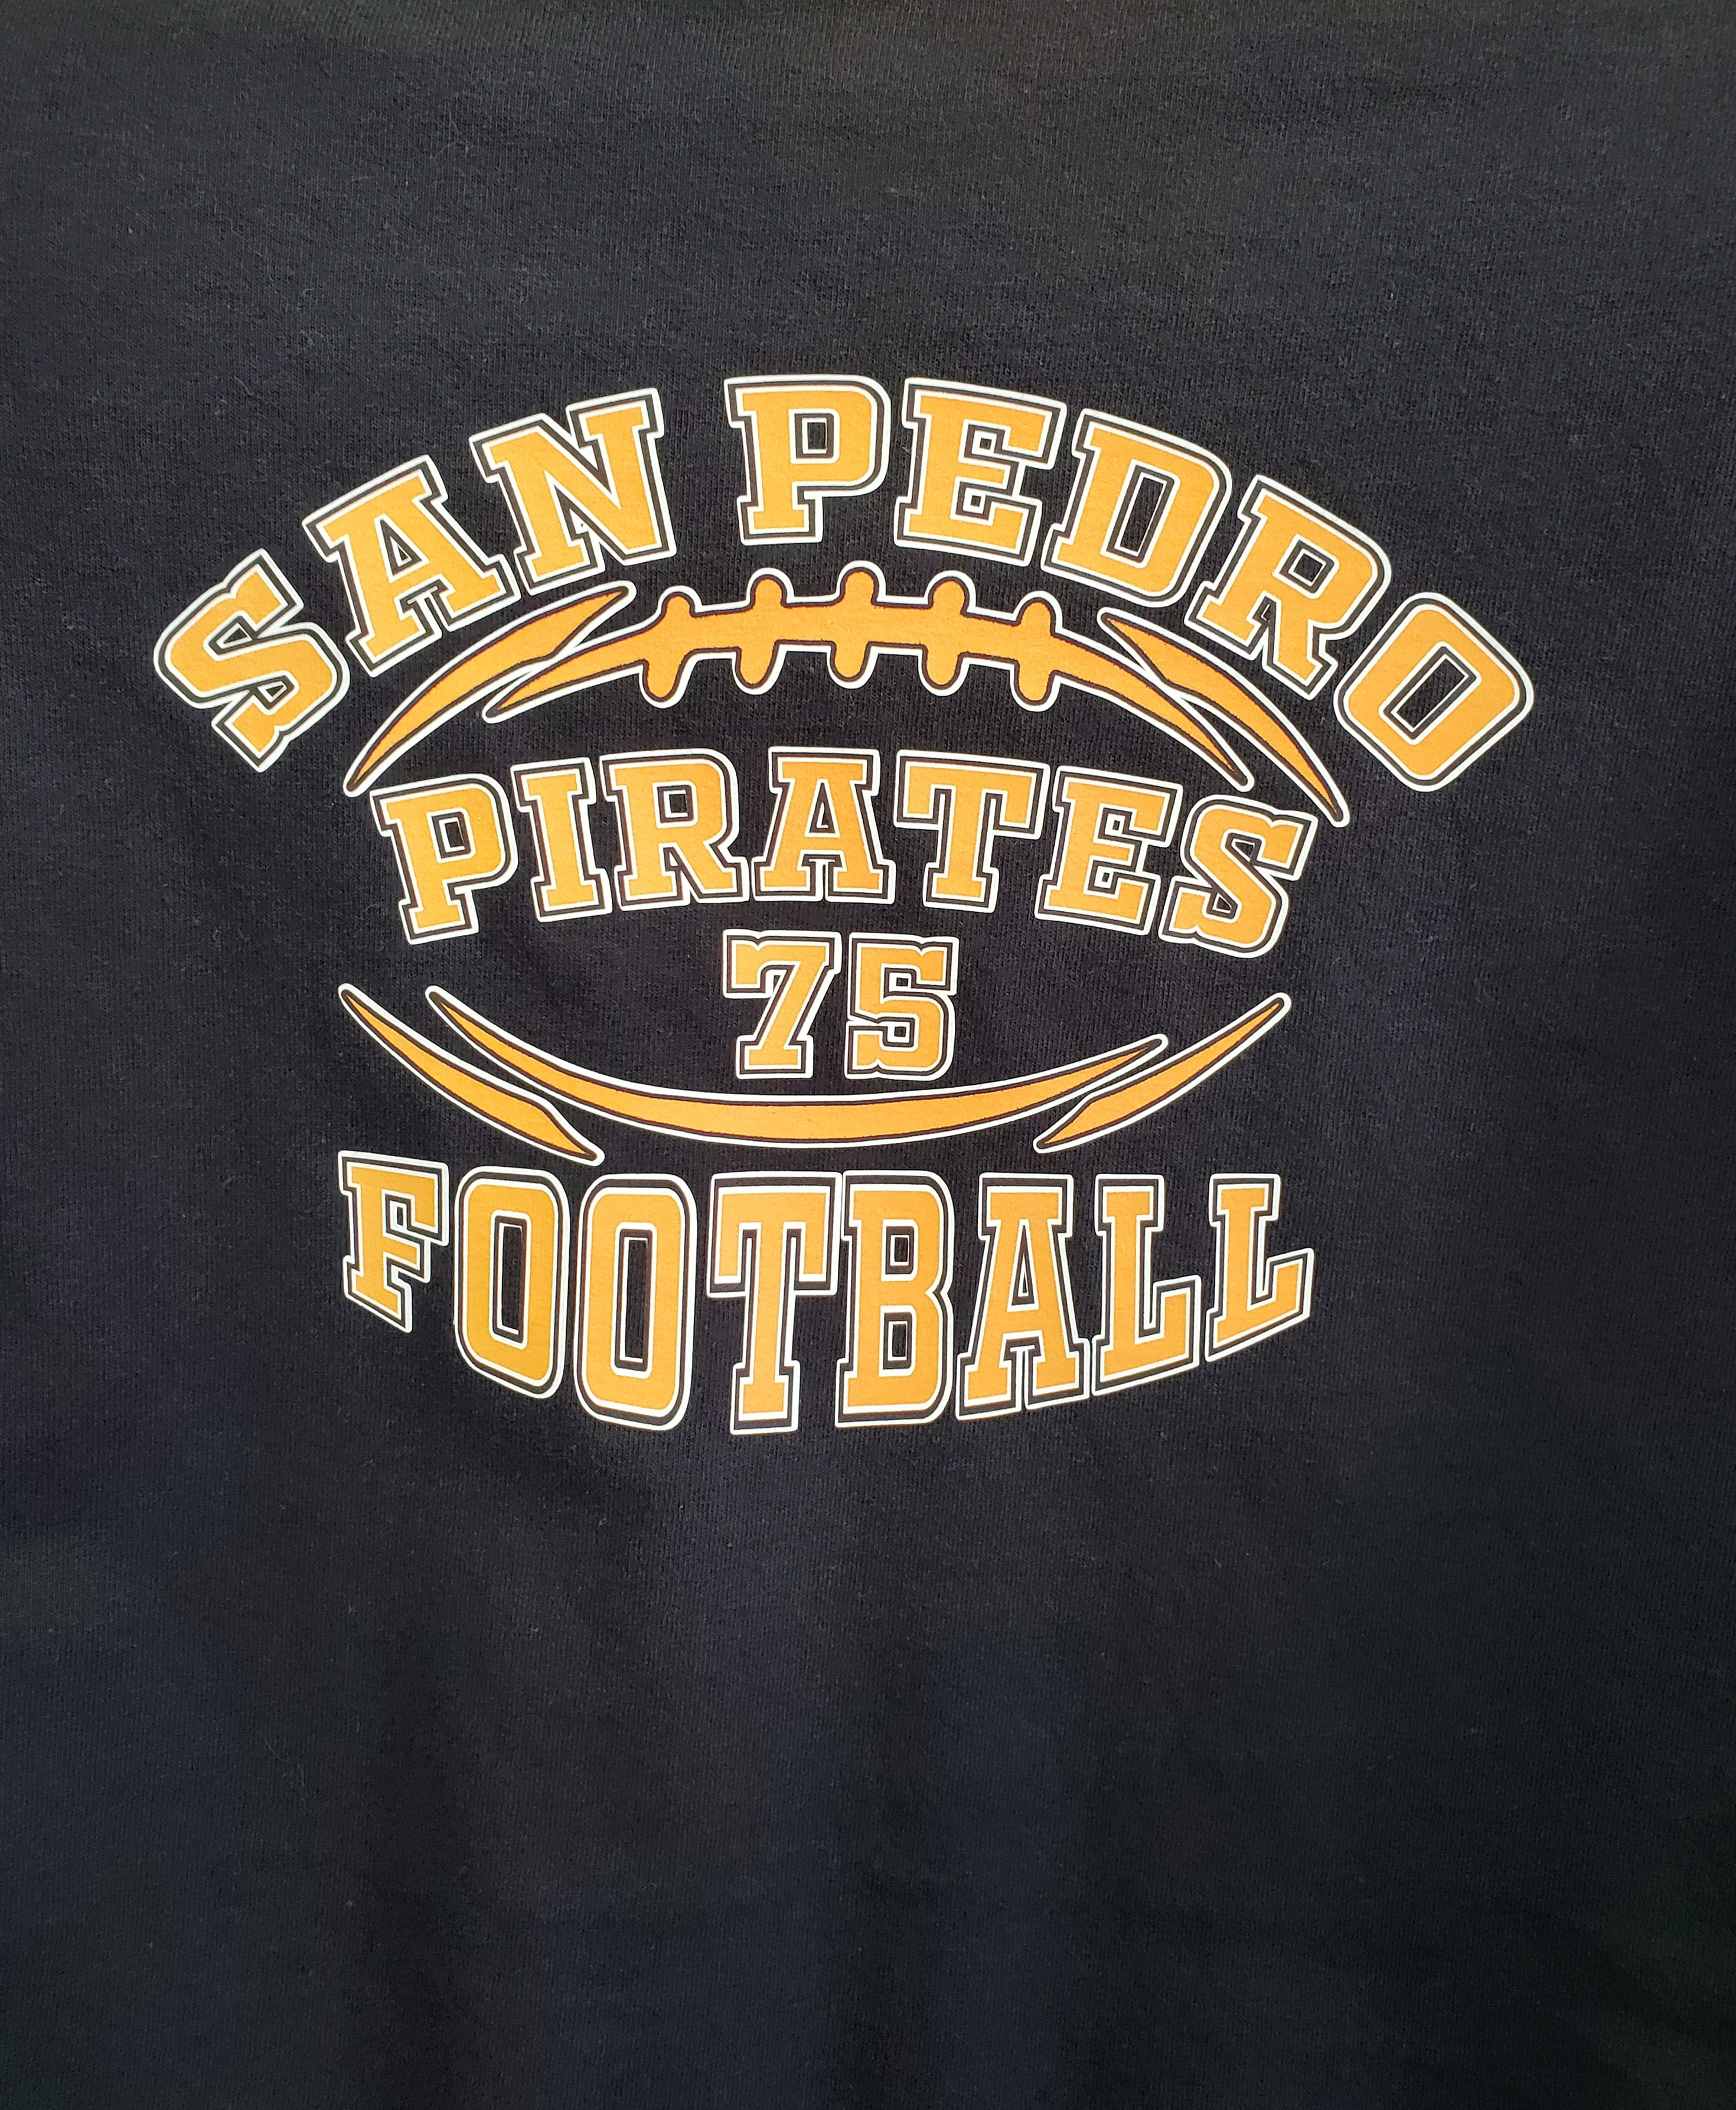  #75 Family HS Football Supprot Shirt made with sublimation printing